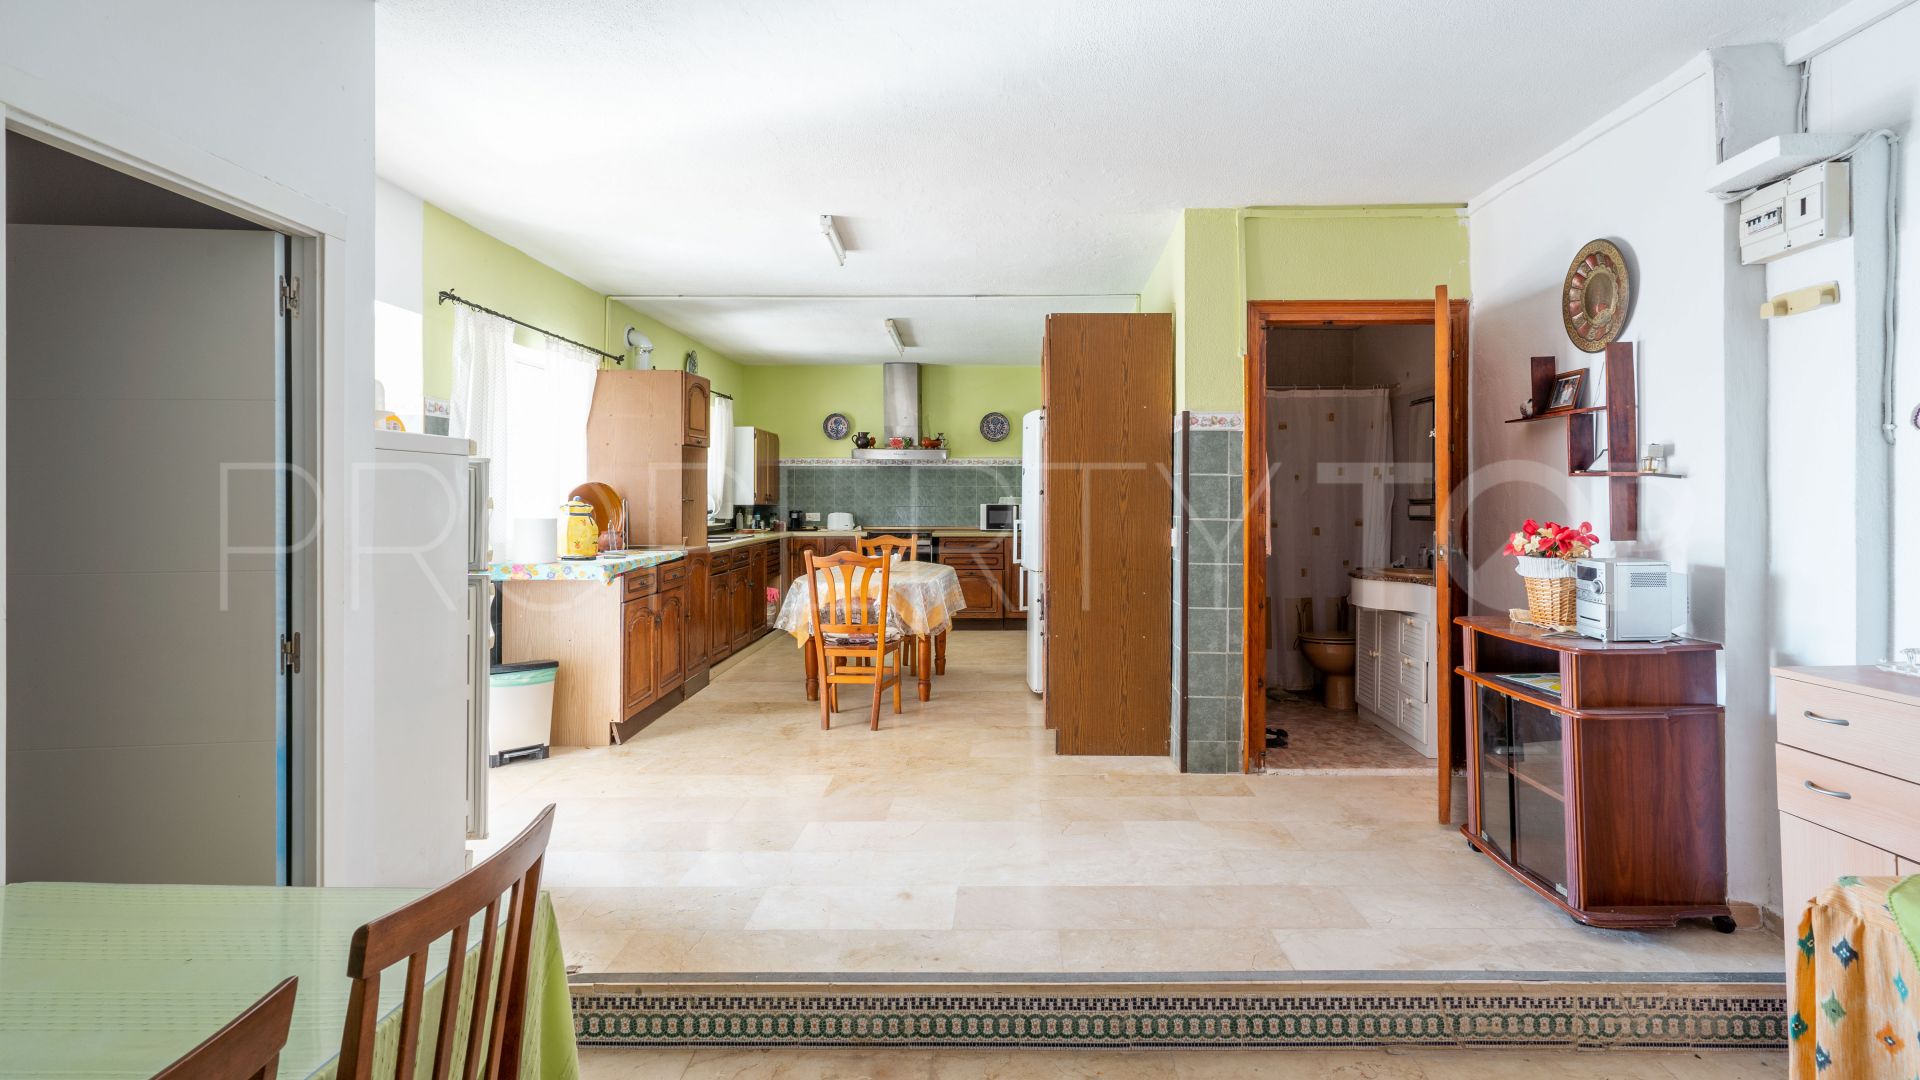 For sale house in Torreguadiaro with 11 bedrooms